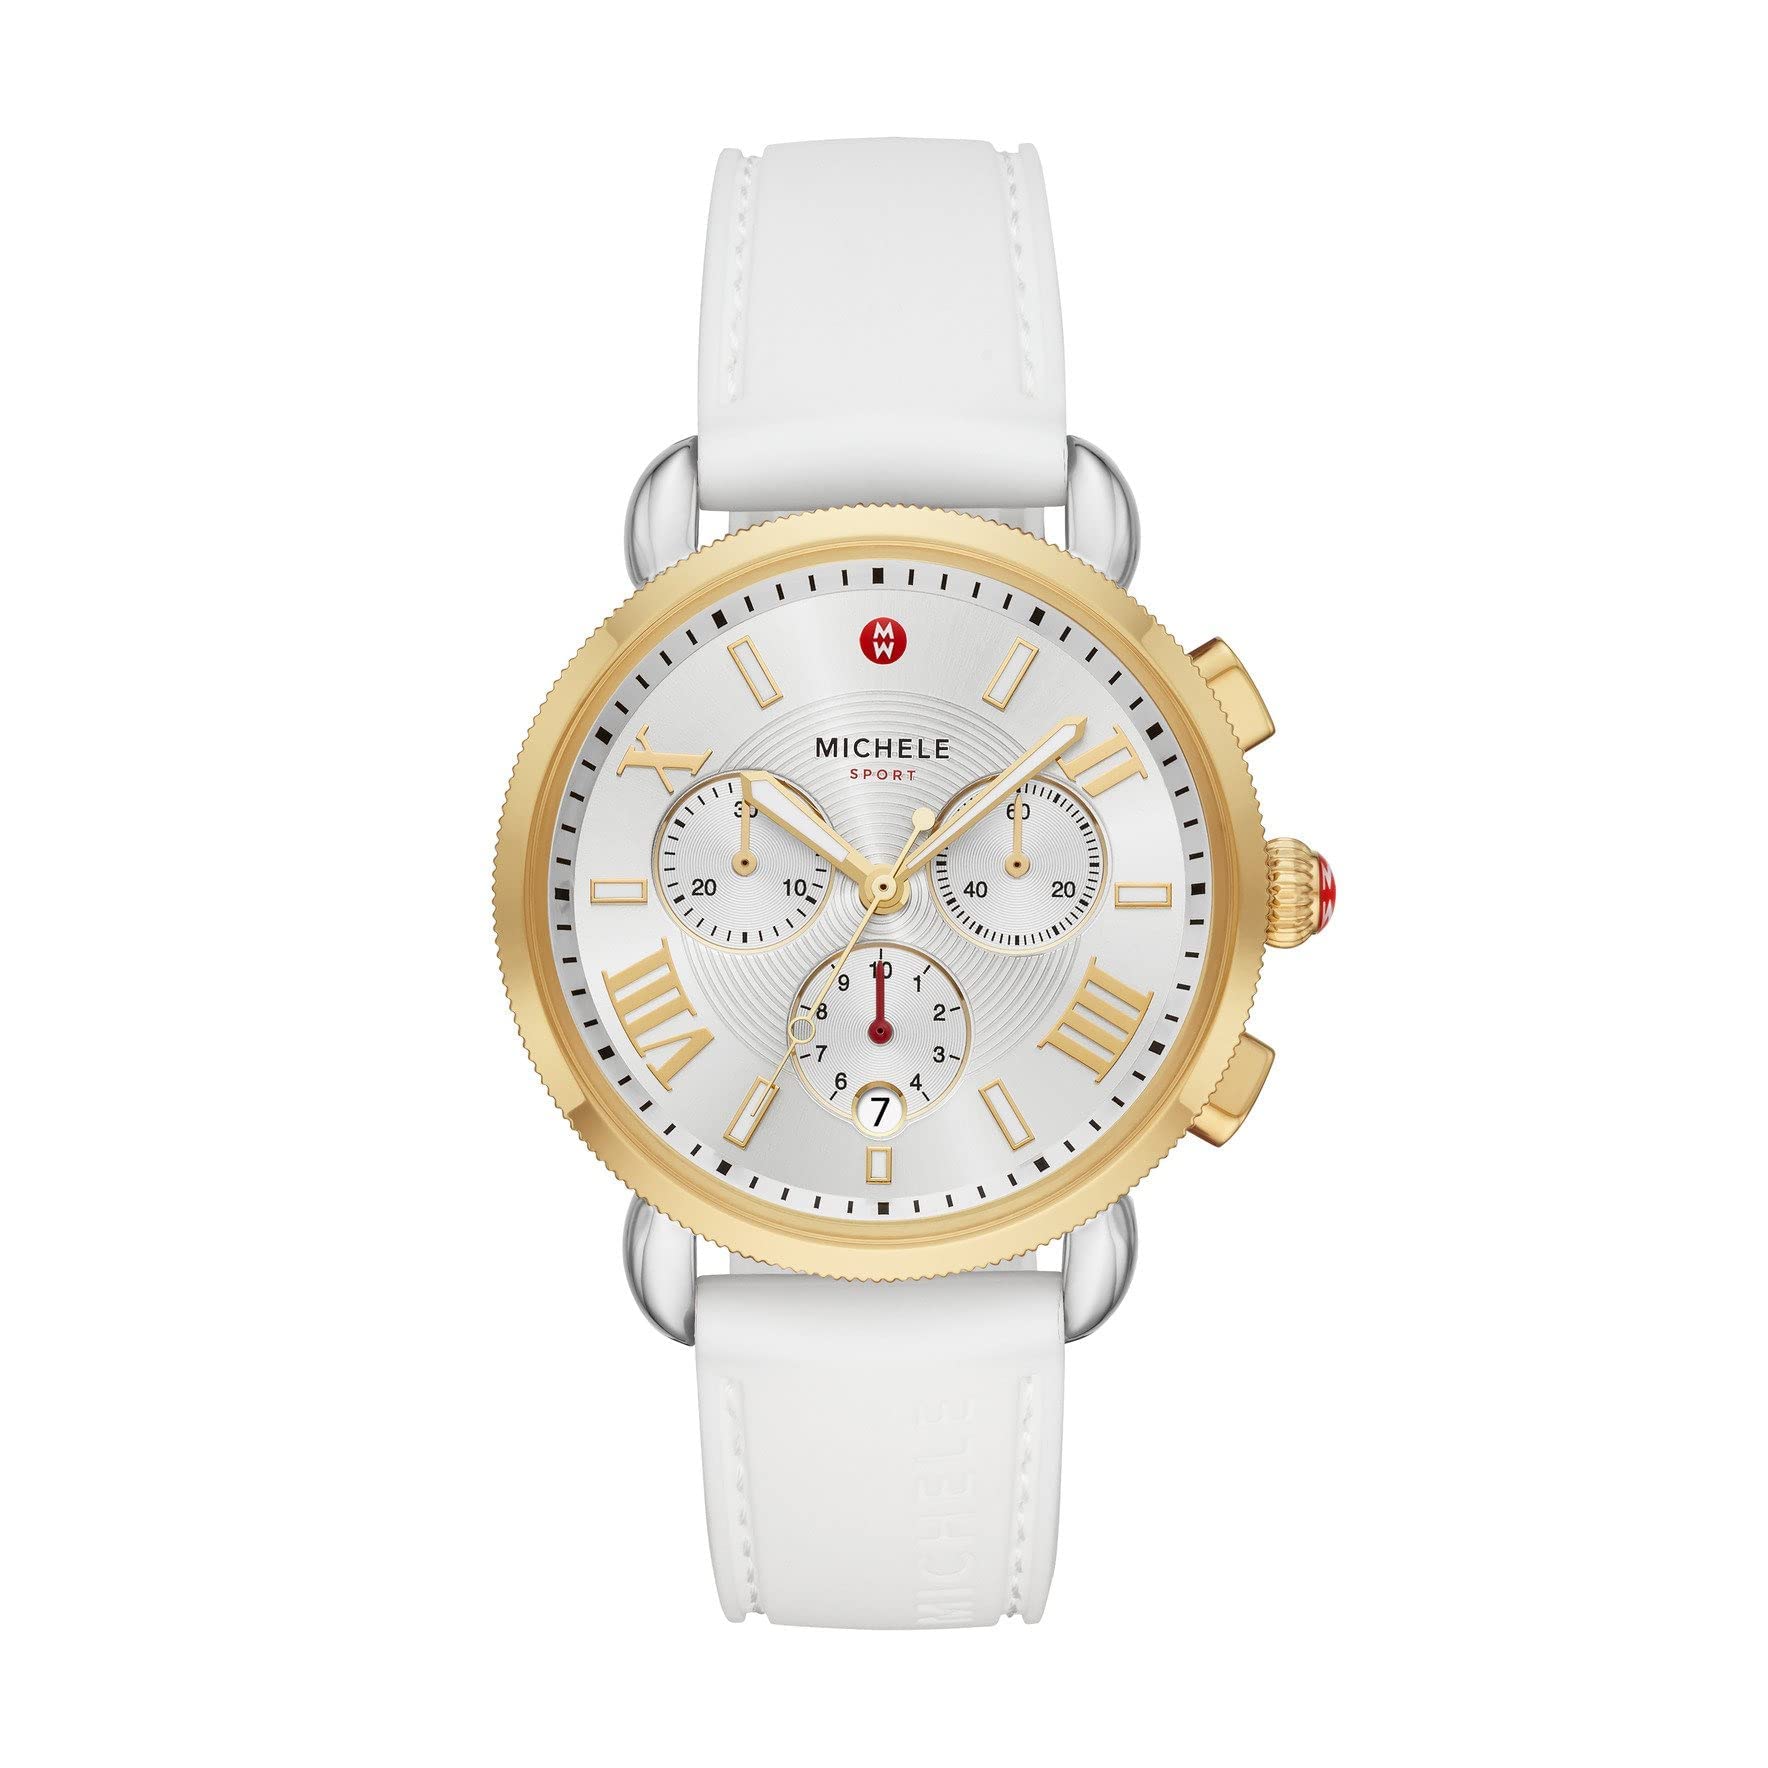 Michele Sport Sail Chronograph Silicone Watch